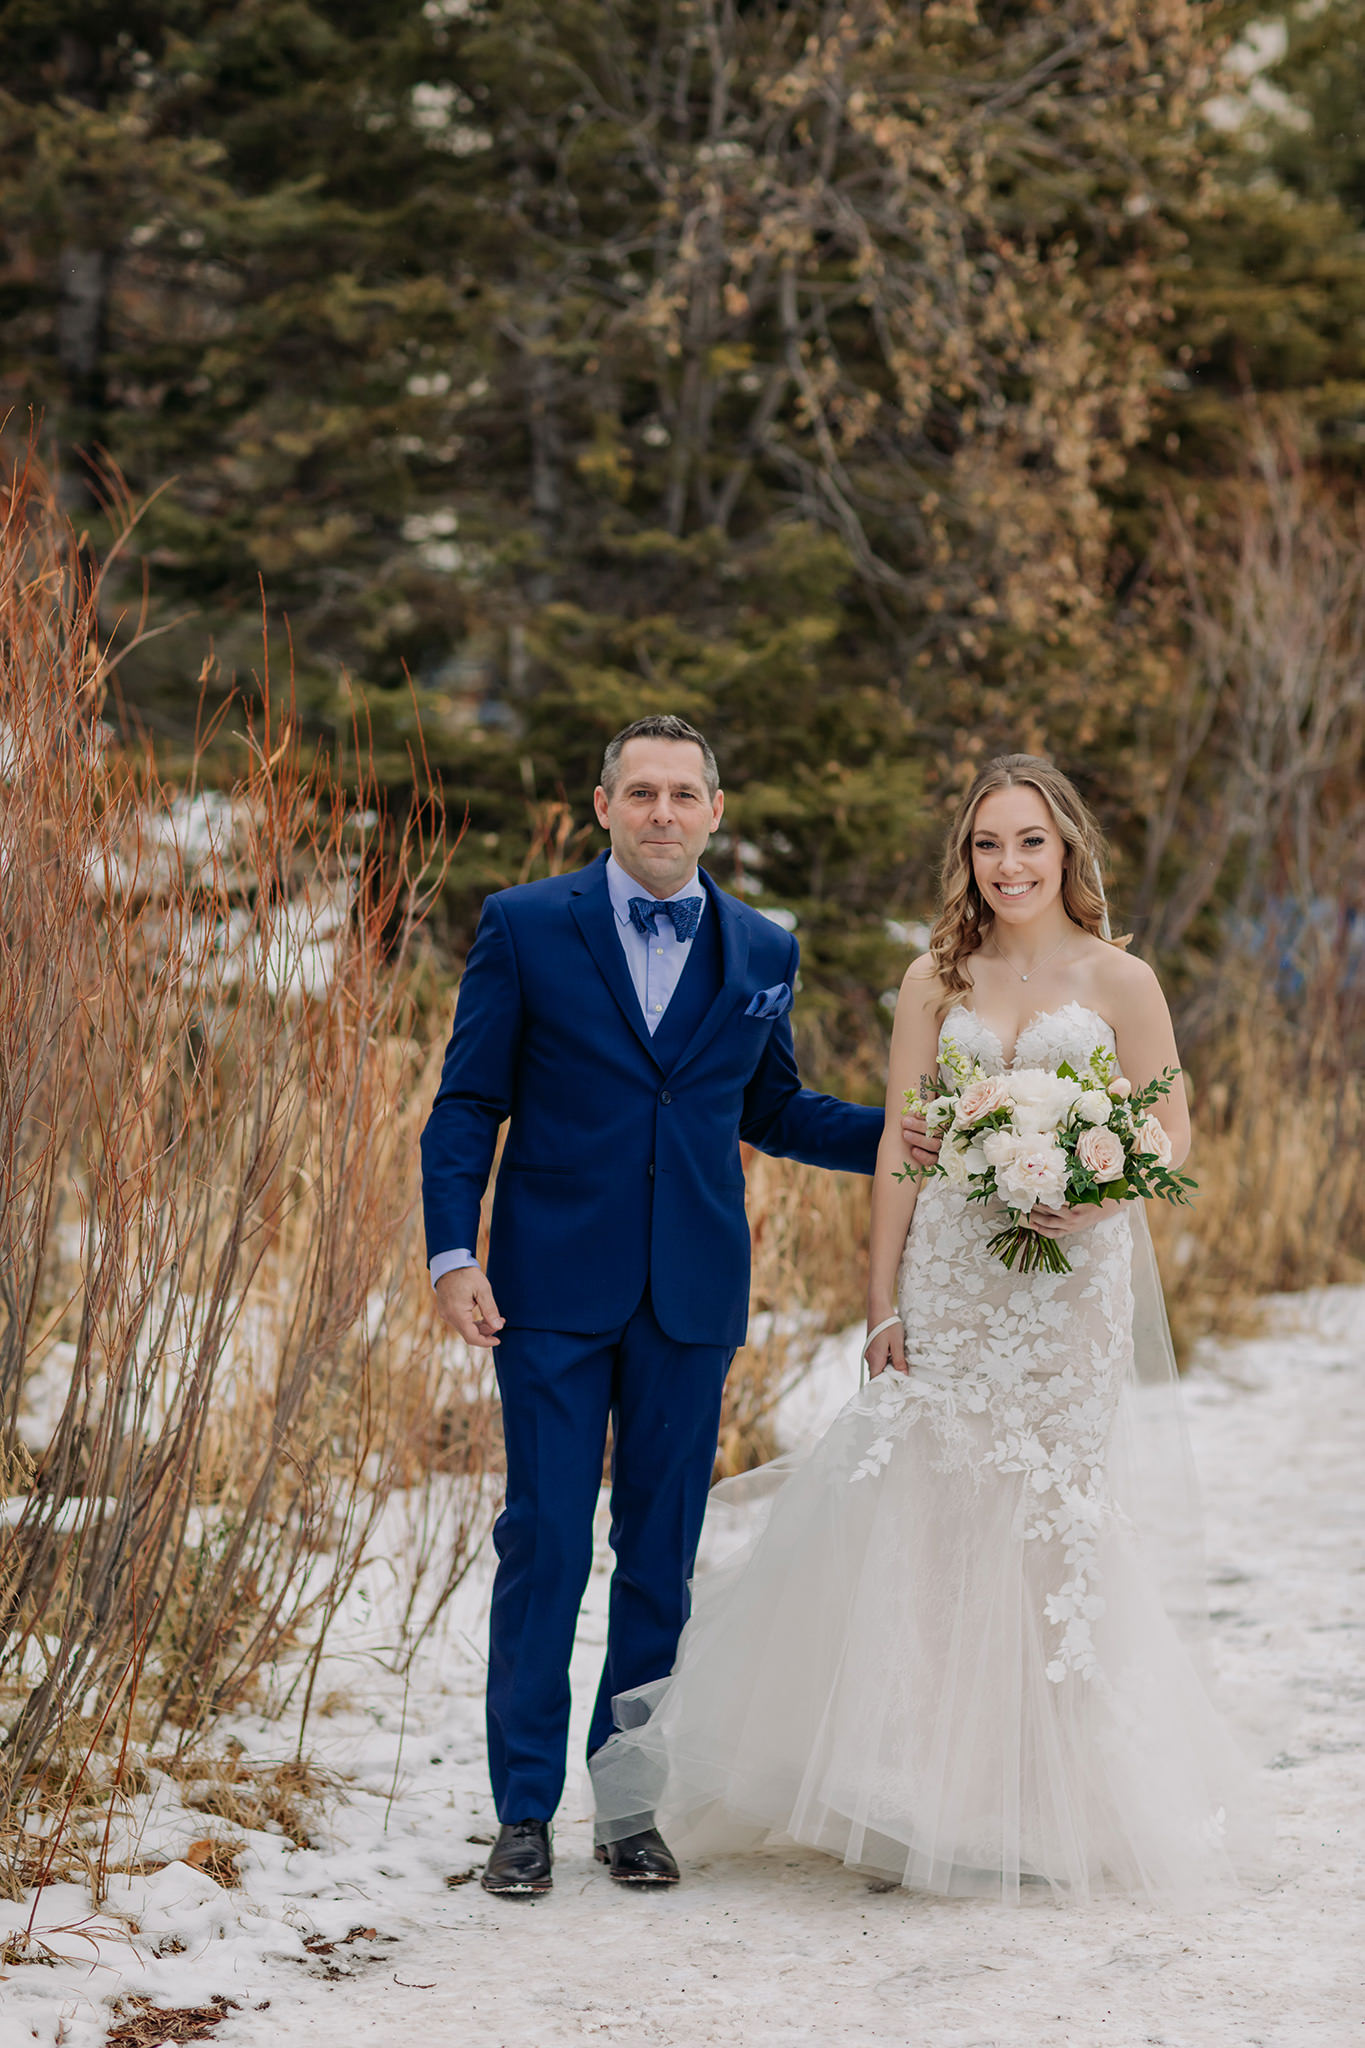 Bride & father walking the snowy paths to the lakeside ceremoyn at Lake Louise in the winter